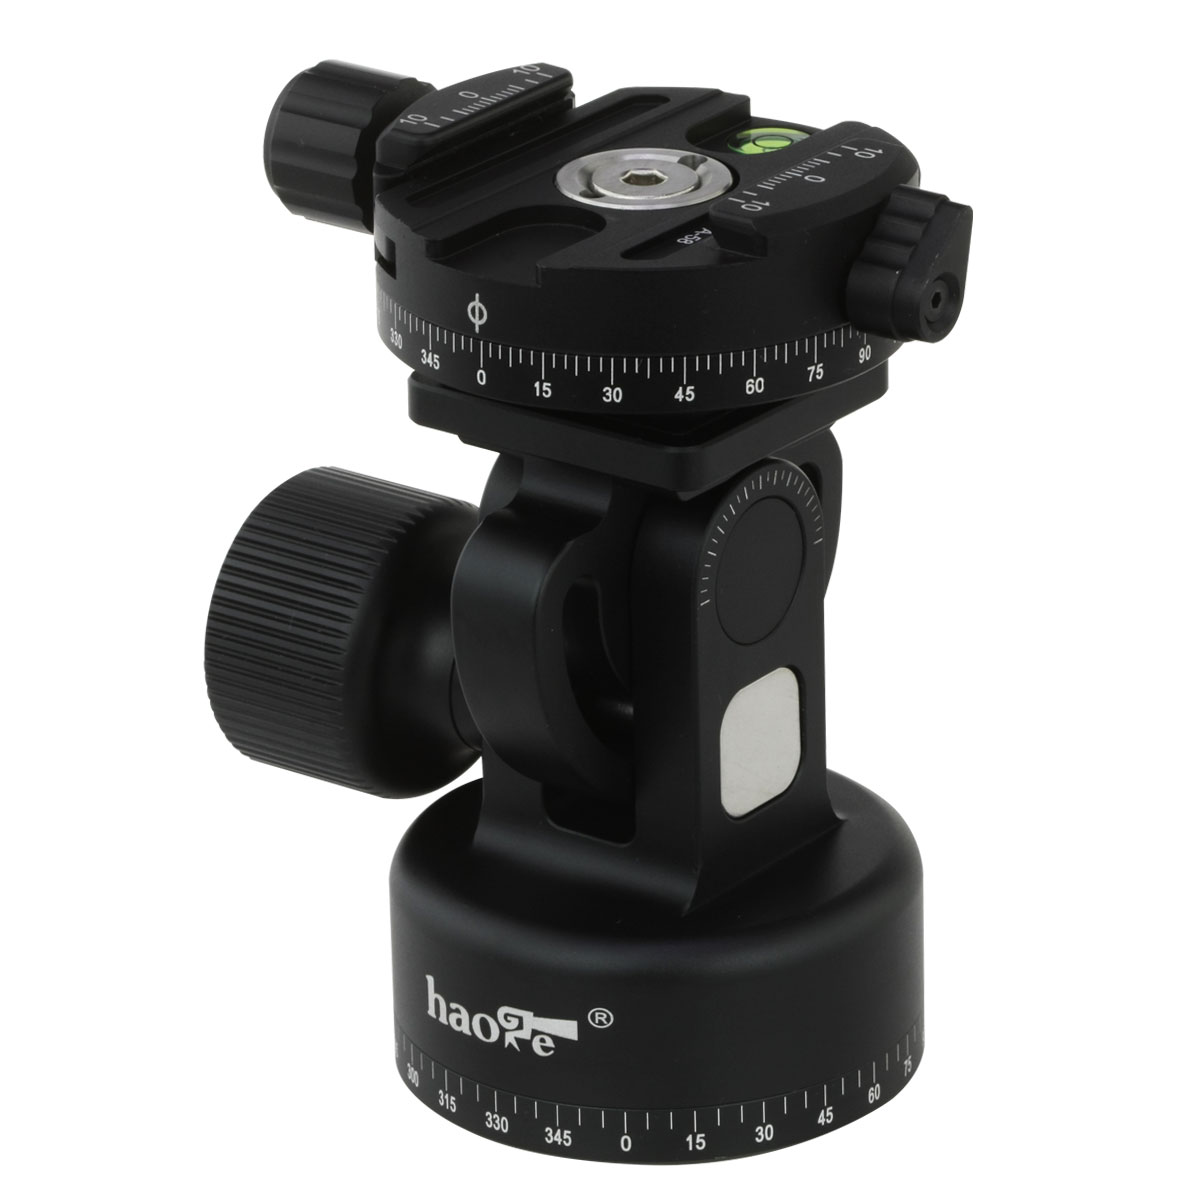 Panoramic Tripod Head with Indexing Rotator Aluminum Alloy 360 Degree Camera Panning Base with Level Arca-Swiss Compatible for ARCA Ball Head Tripod Monopod Ballhead DSLR Cameras